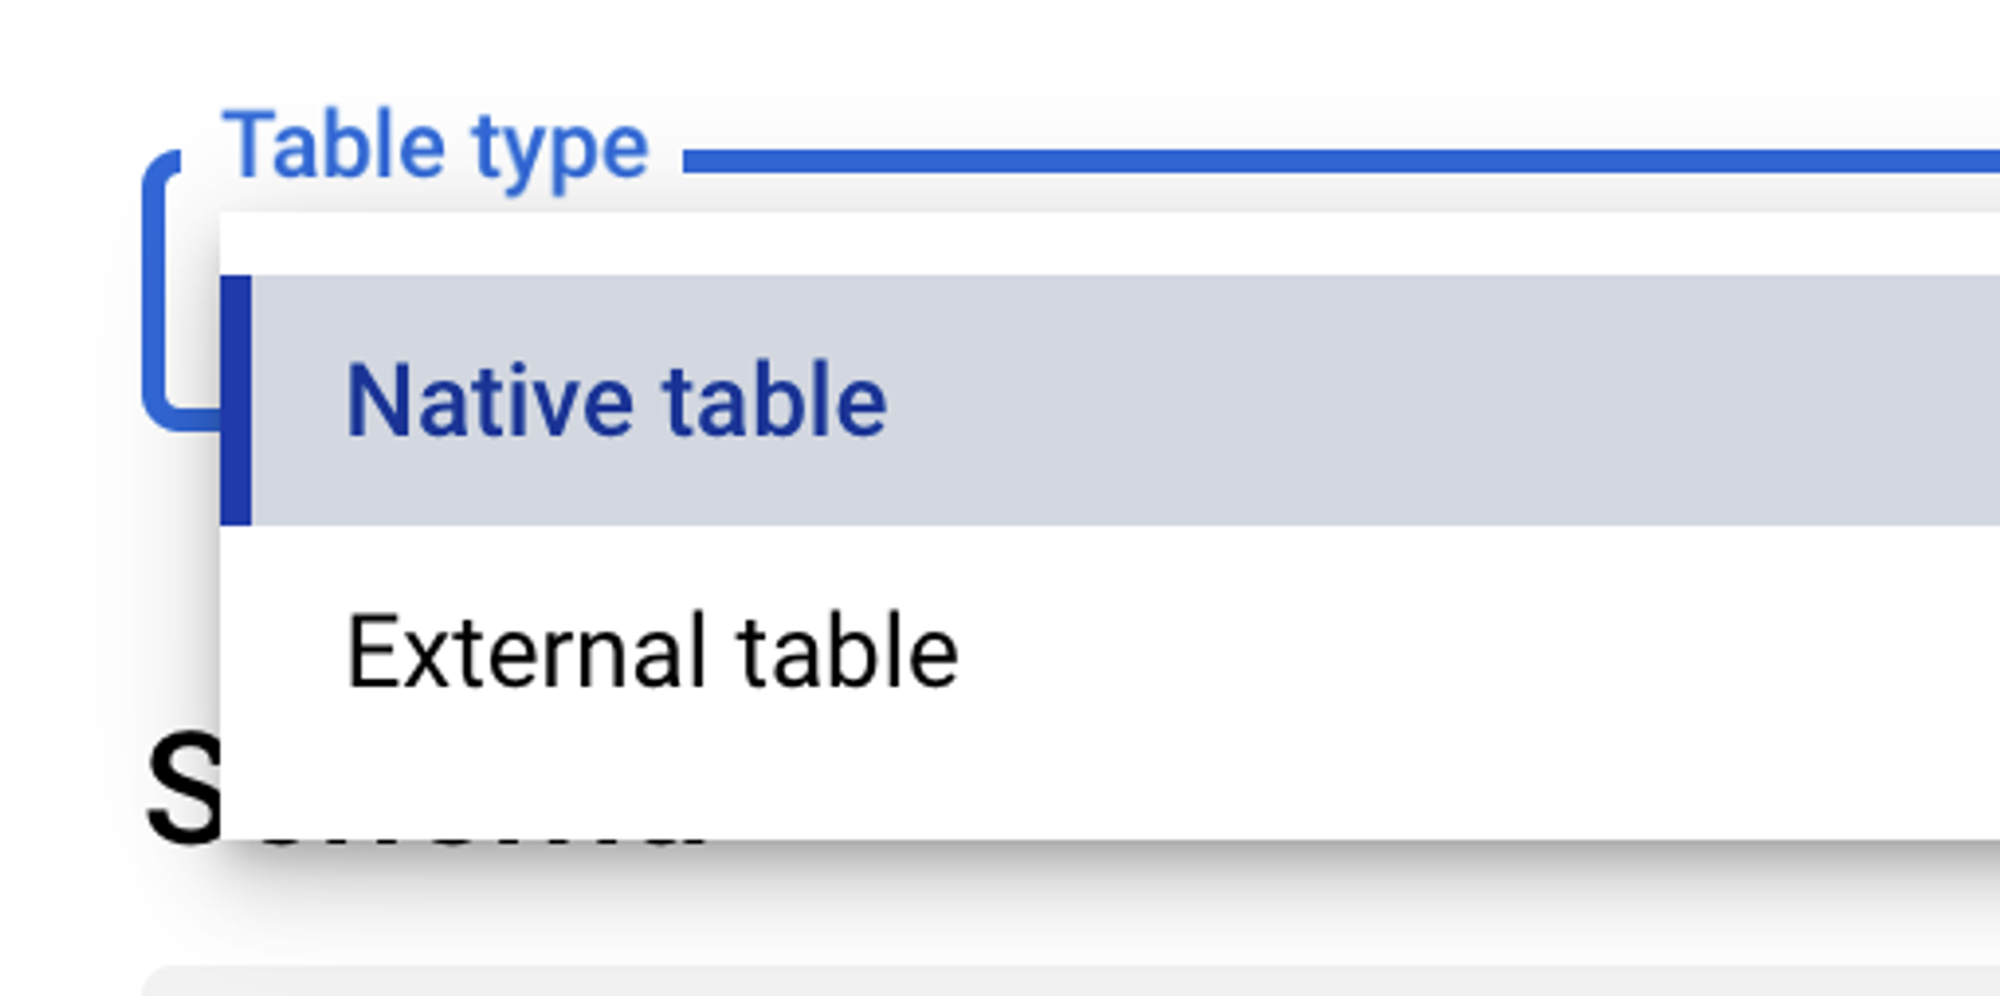 user might have the option to or be forced to create an “external table”. Table creation dialog, BigQuery console.